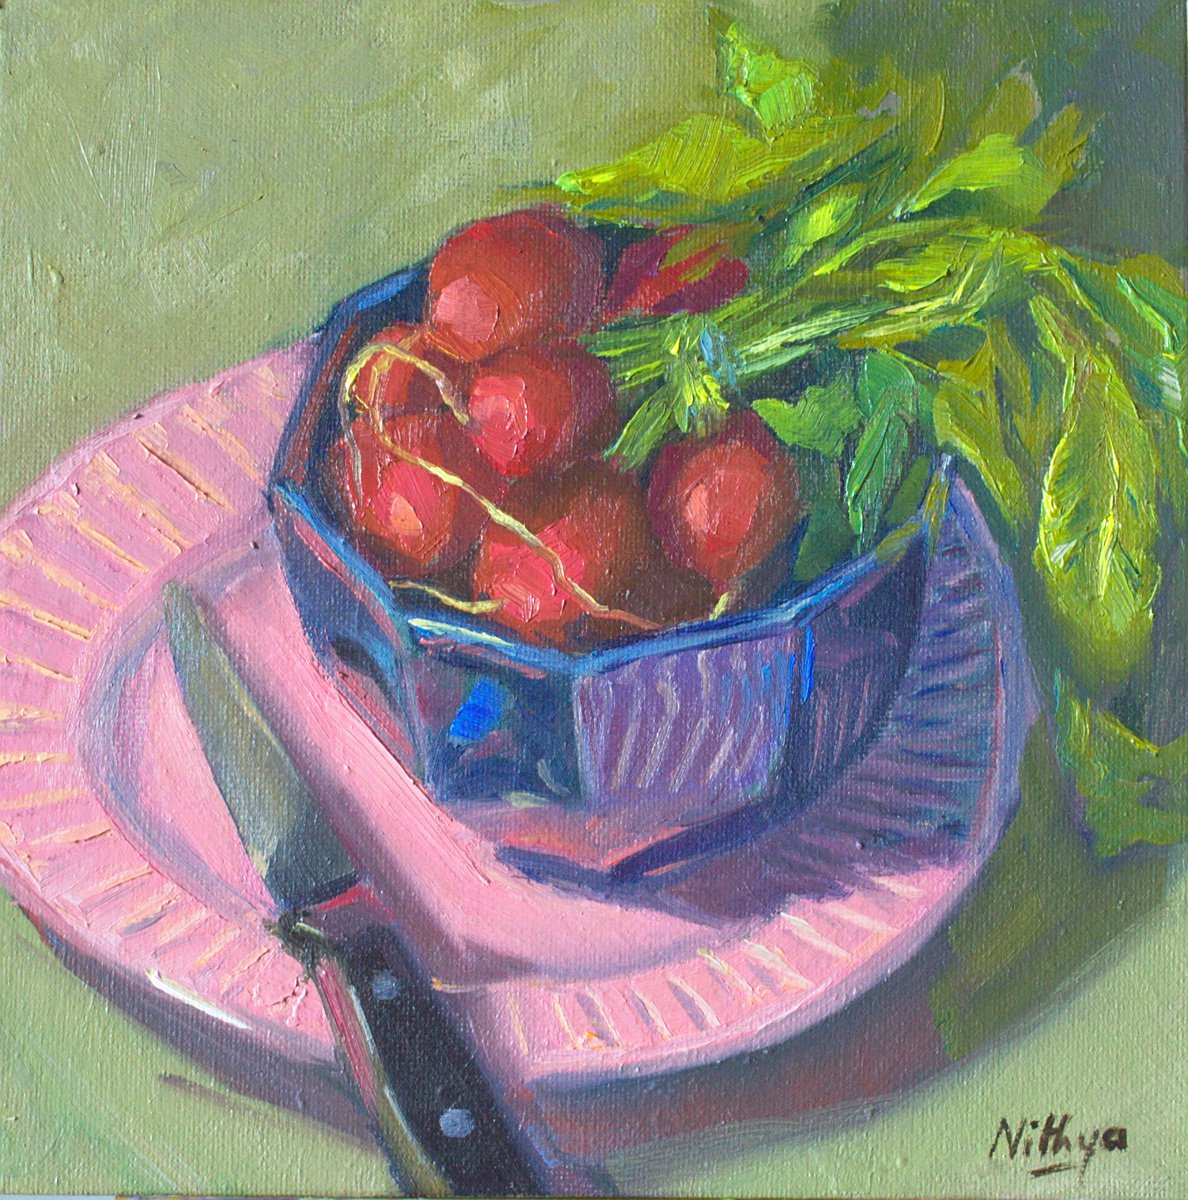 Kitchen Decor - Radishes in a Bowl - Small Oil painting, home decor by Nithya Swaminathan